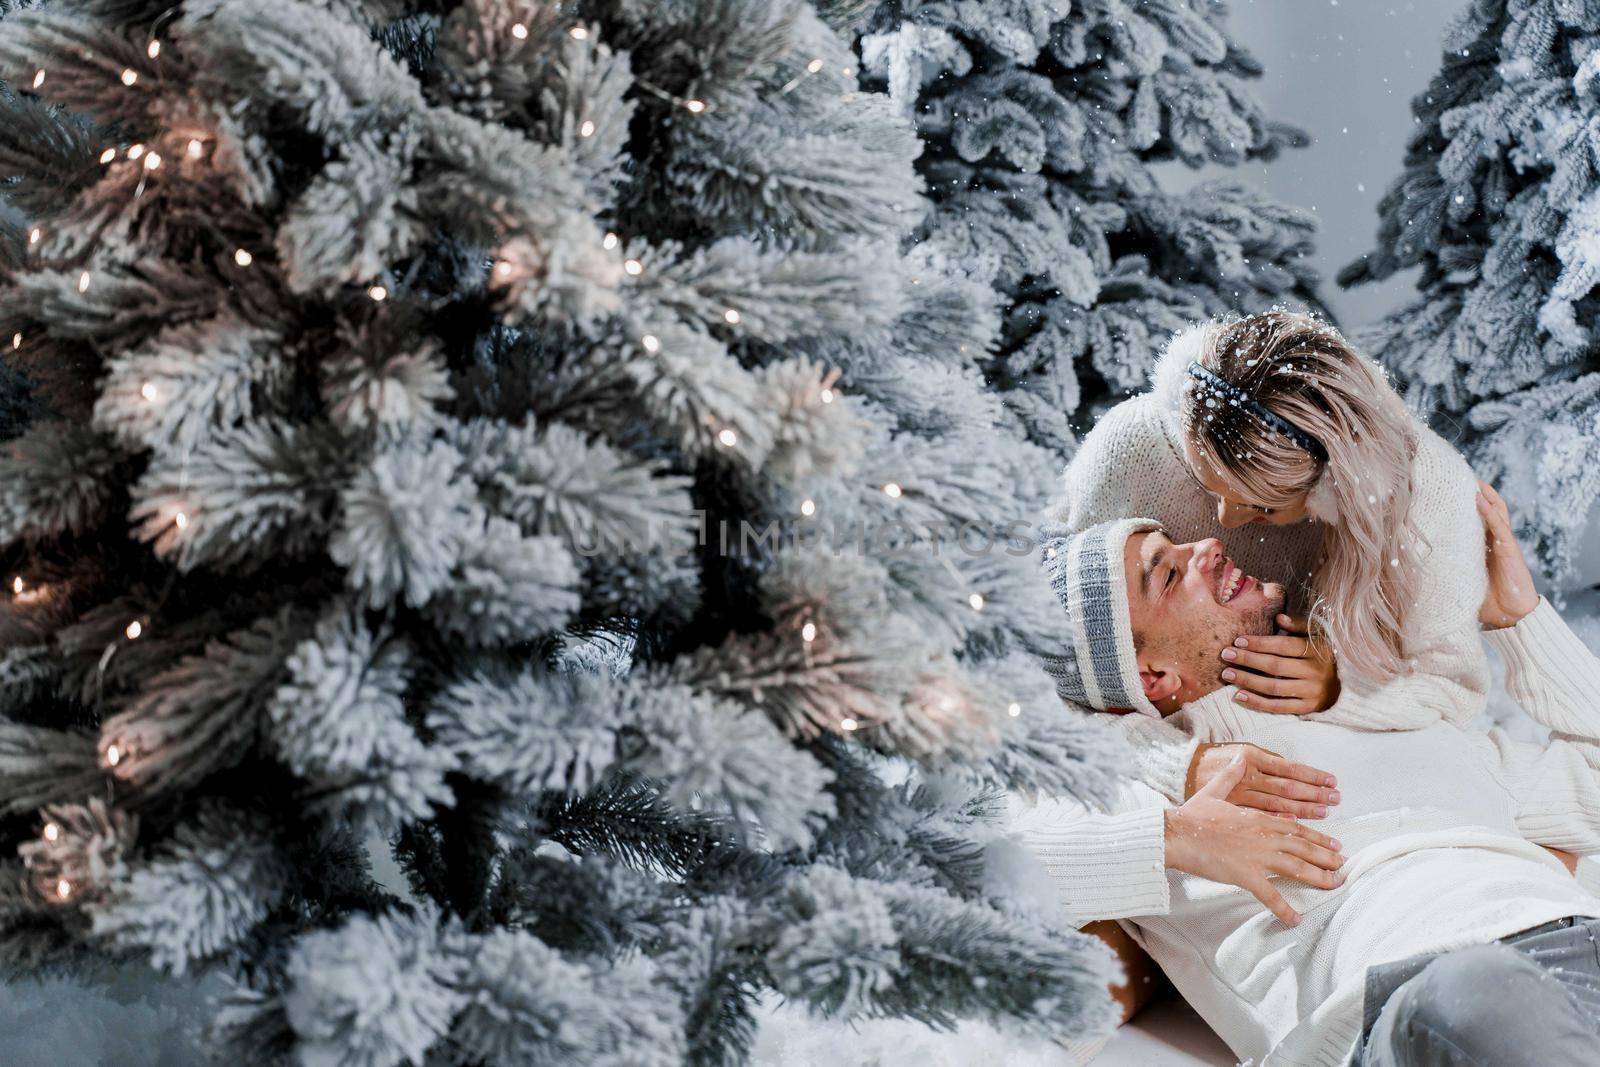 New year love story. Couple kisses and hugs. People weared wearing fur headphones, hats, white sweaters. Happy young couple hugs and kiss near christmas trees in winter day.